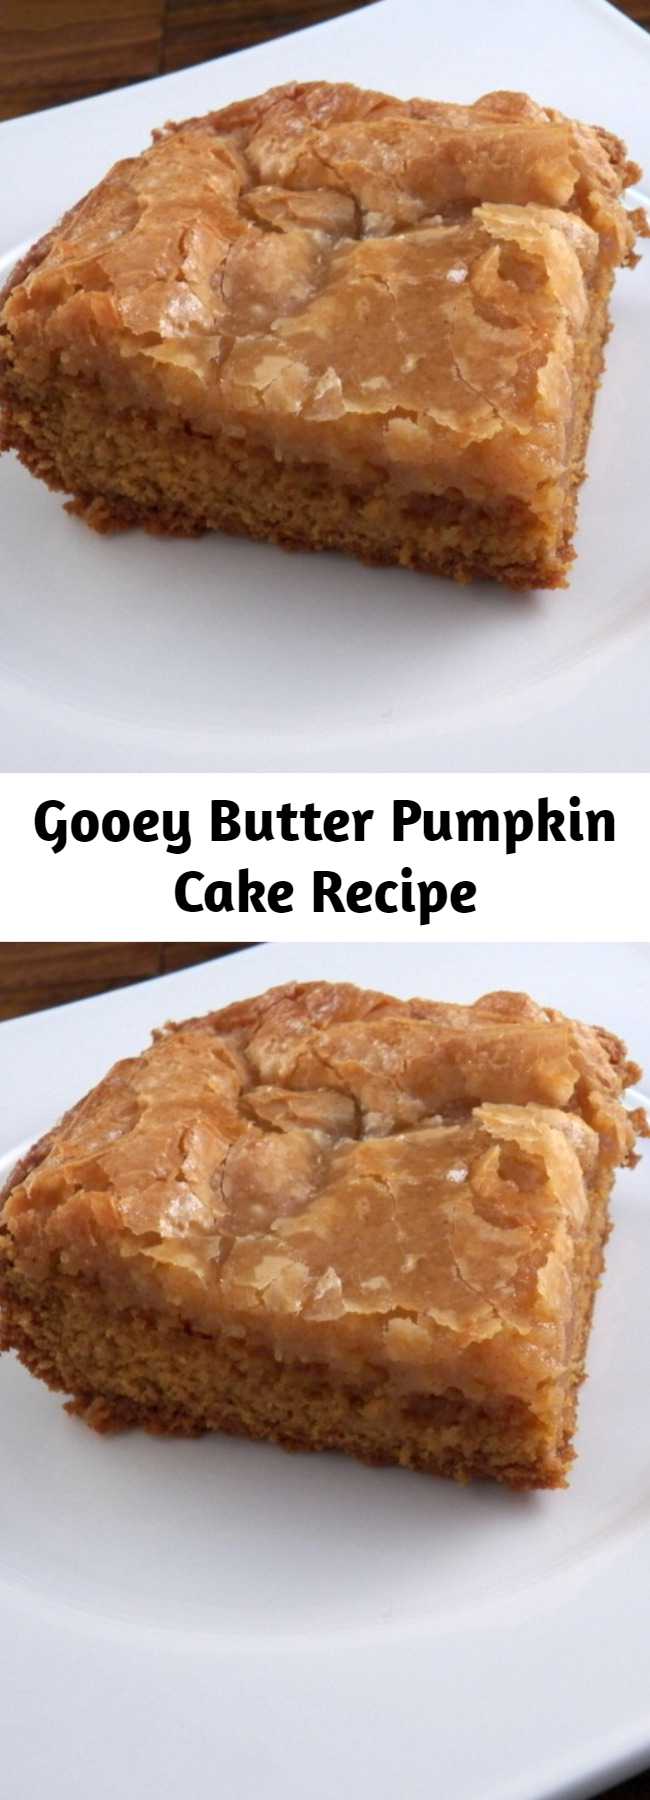 Gooey Butter Pumpkin Cake Recipe - This recipe comes together in minutes and then you just bake, cool and serve. How much easier can you get in life and on top of that it is so unbelievably good that it will definitely impress your friends and family.